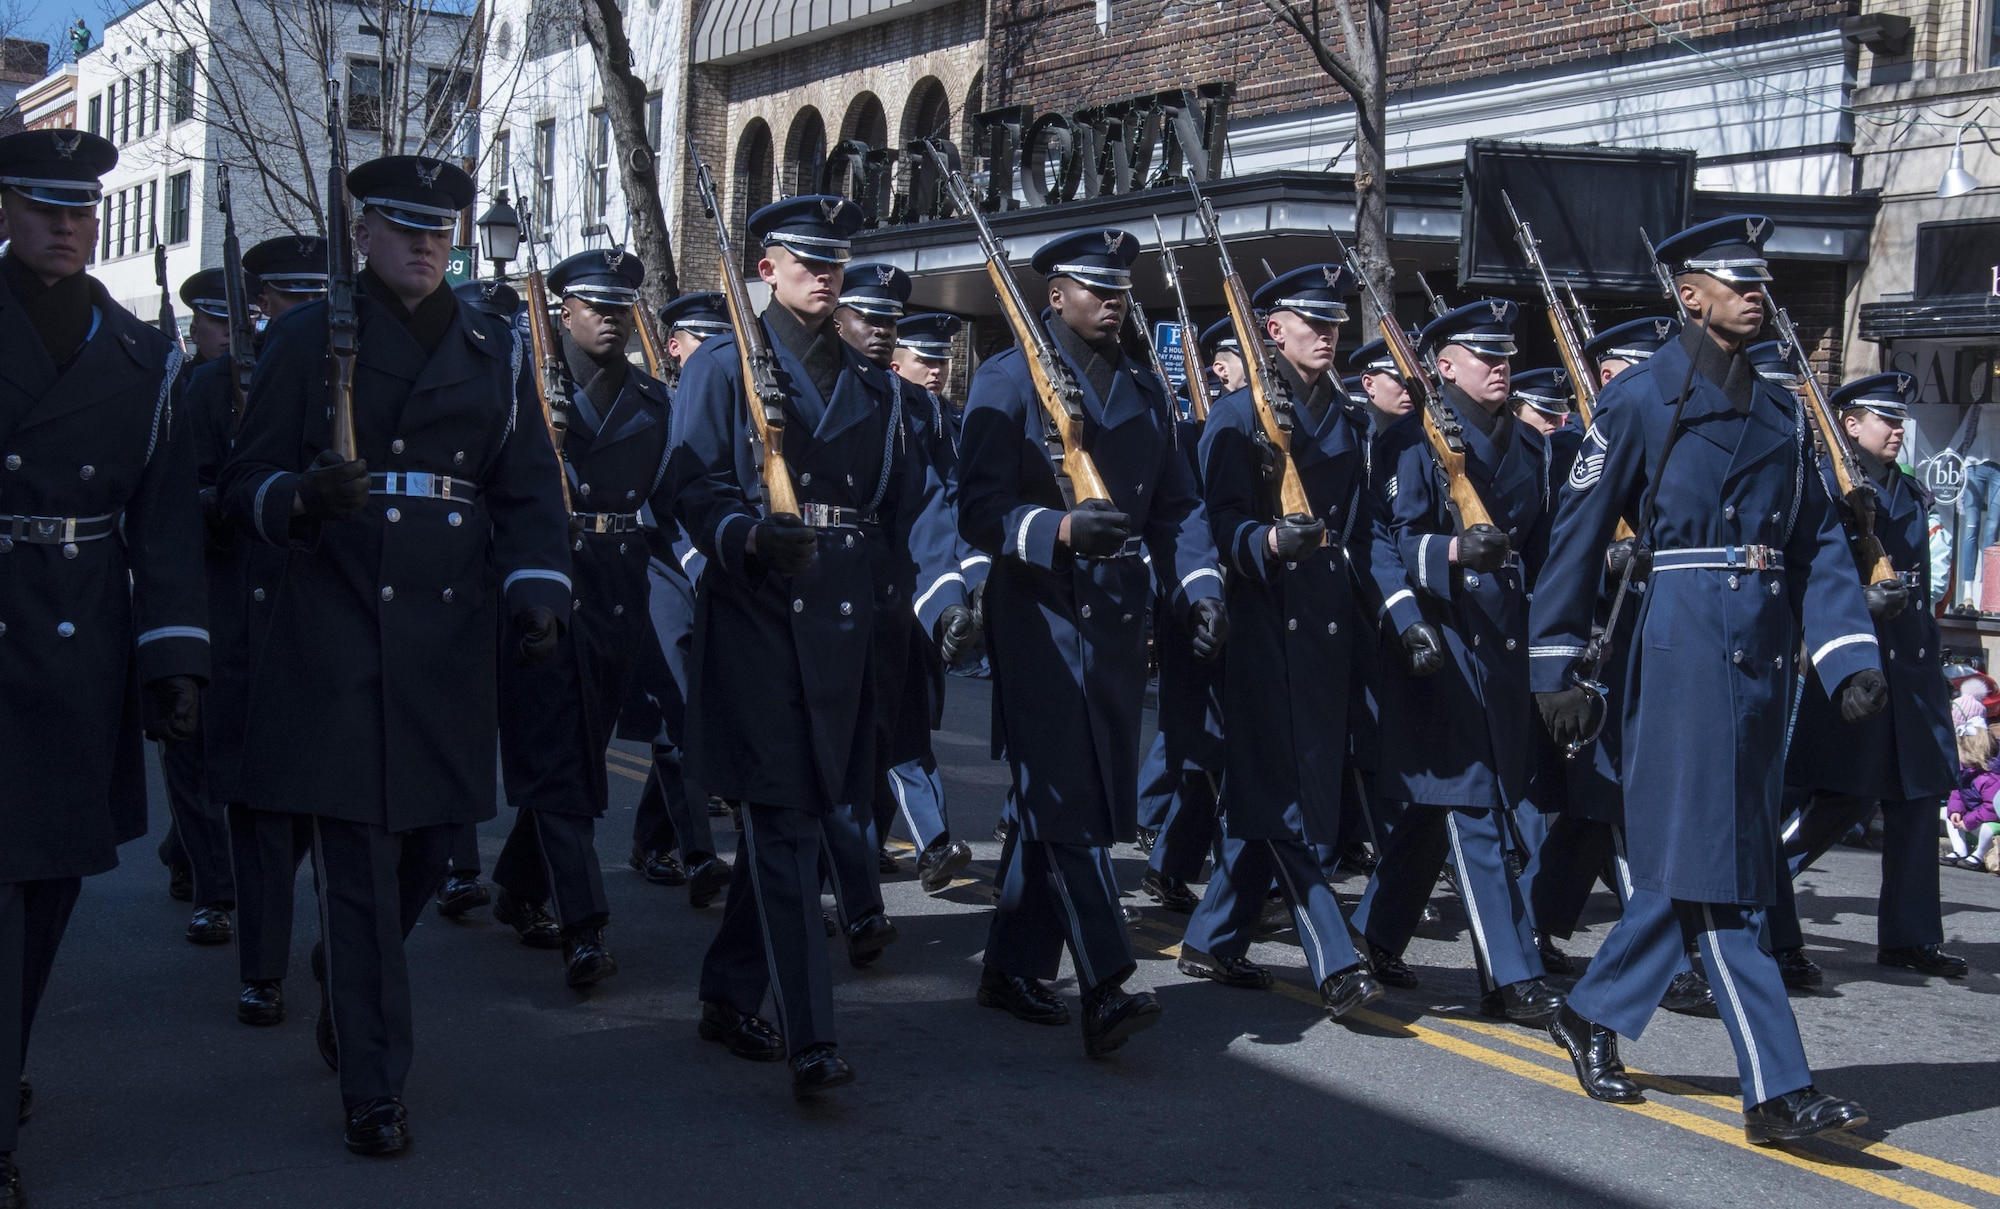 The U.S. Air Force Honor Guard marches in the 2017 Saint Patrick’s Day Parade in Alexandria, Va., March 4, 2017. The flight was composed of approximately 25 Airmen who serve to promote the Air Force mission by showcasing drill performances to recruit, retain and inspire. (U.S. Air Force photo by Senior Airman Jordyn Fetter)